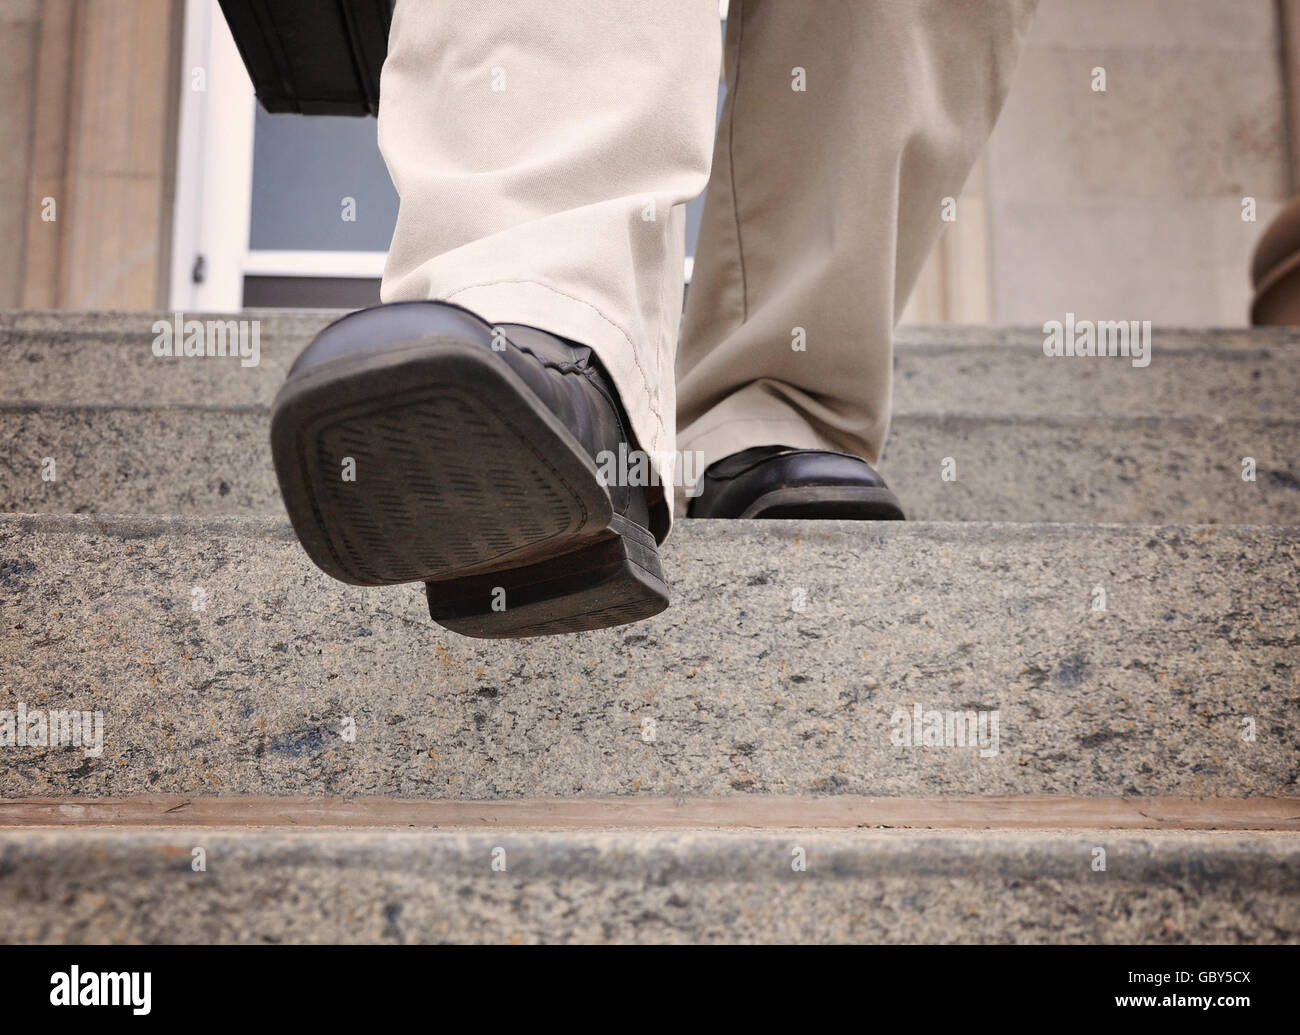 A business man is stepping down the stairs at an office for a power, challenge or motivation concept. Stock Photo